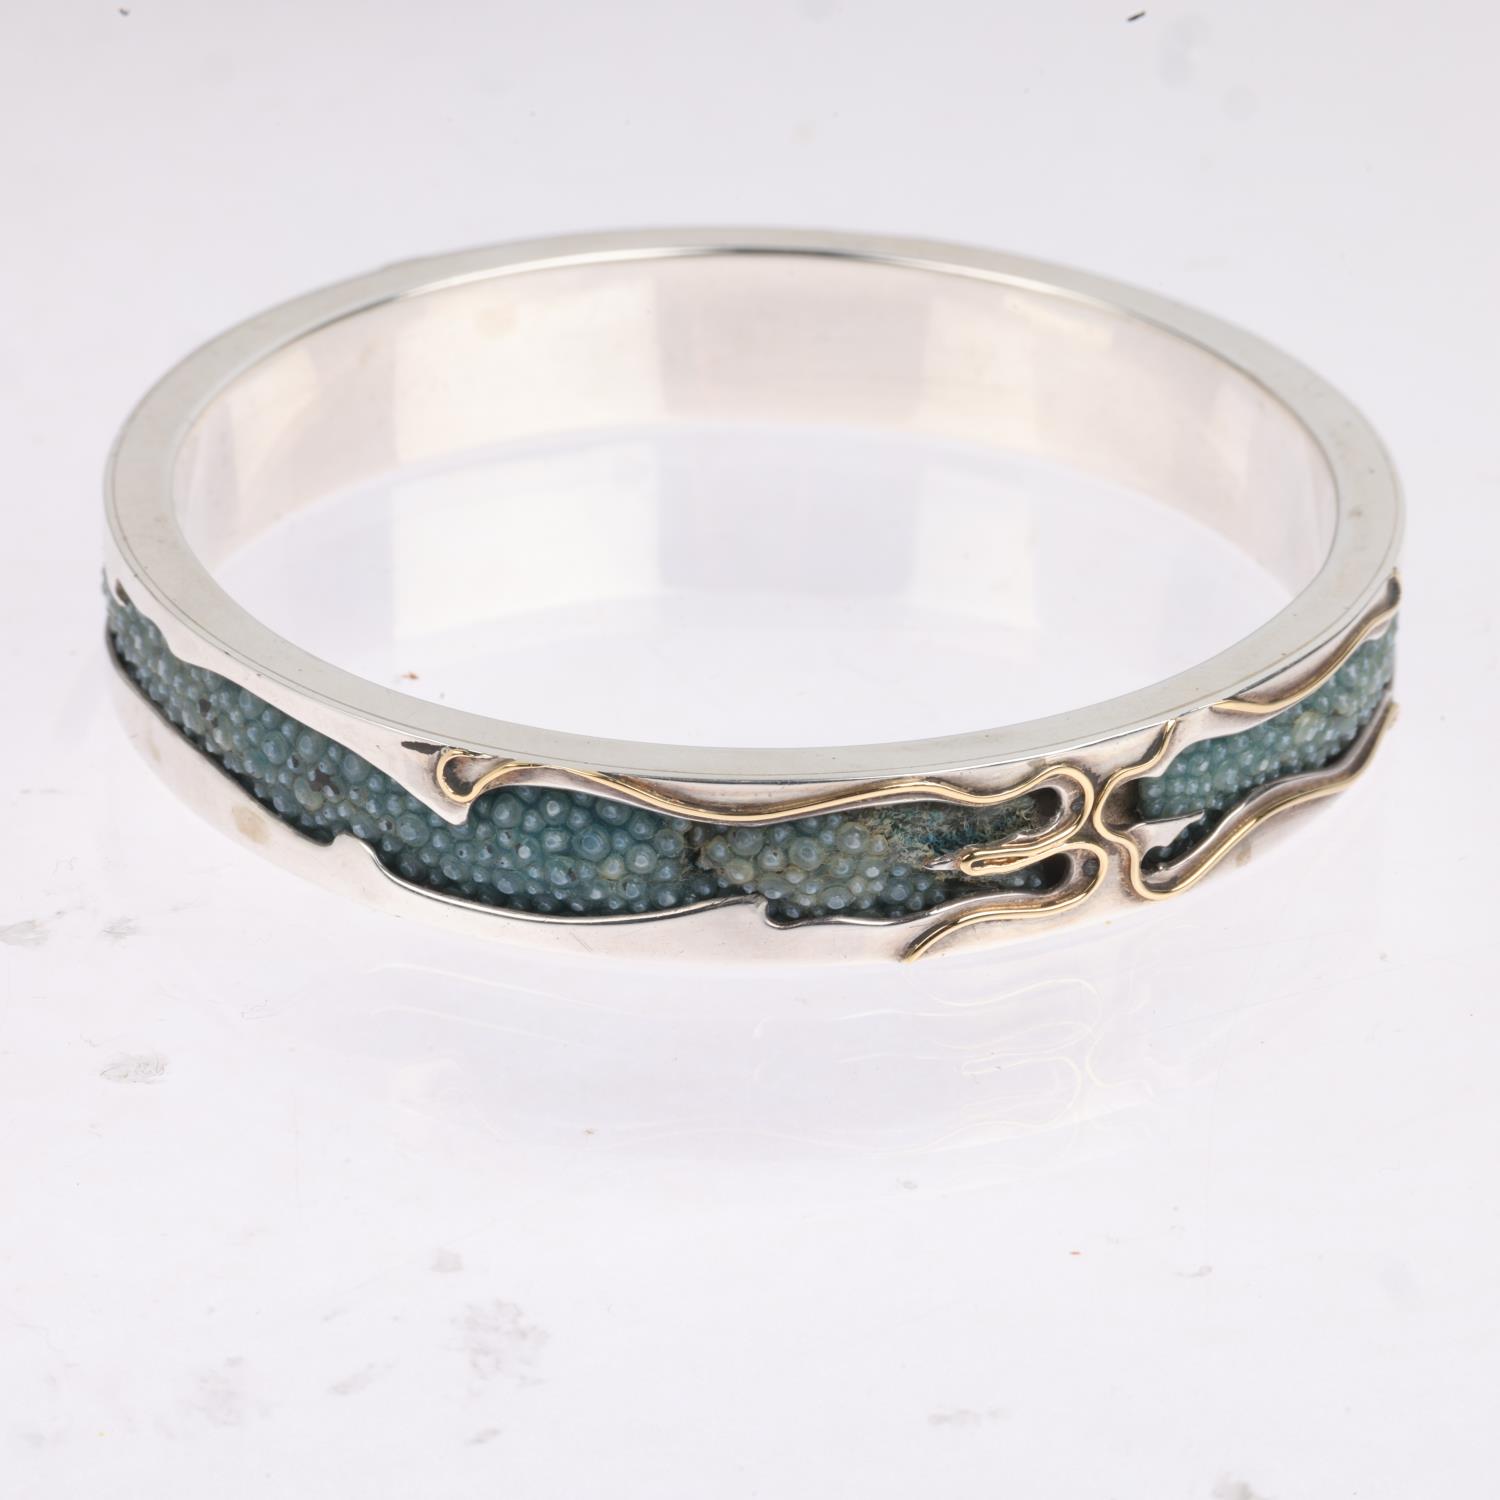 CLIVE & CLARISSA COOKE - a sterling silver 18ct gold overlaid shark skin shagreen slave bangle, - Image 2 of 3